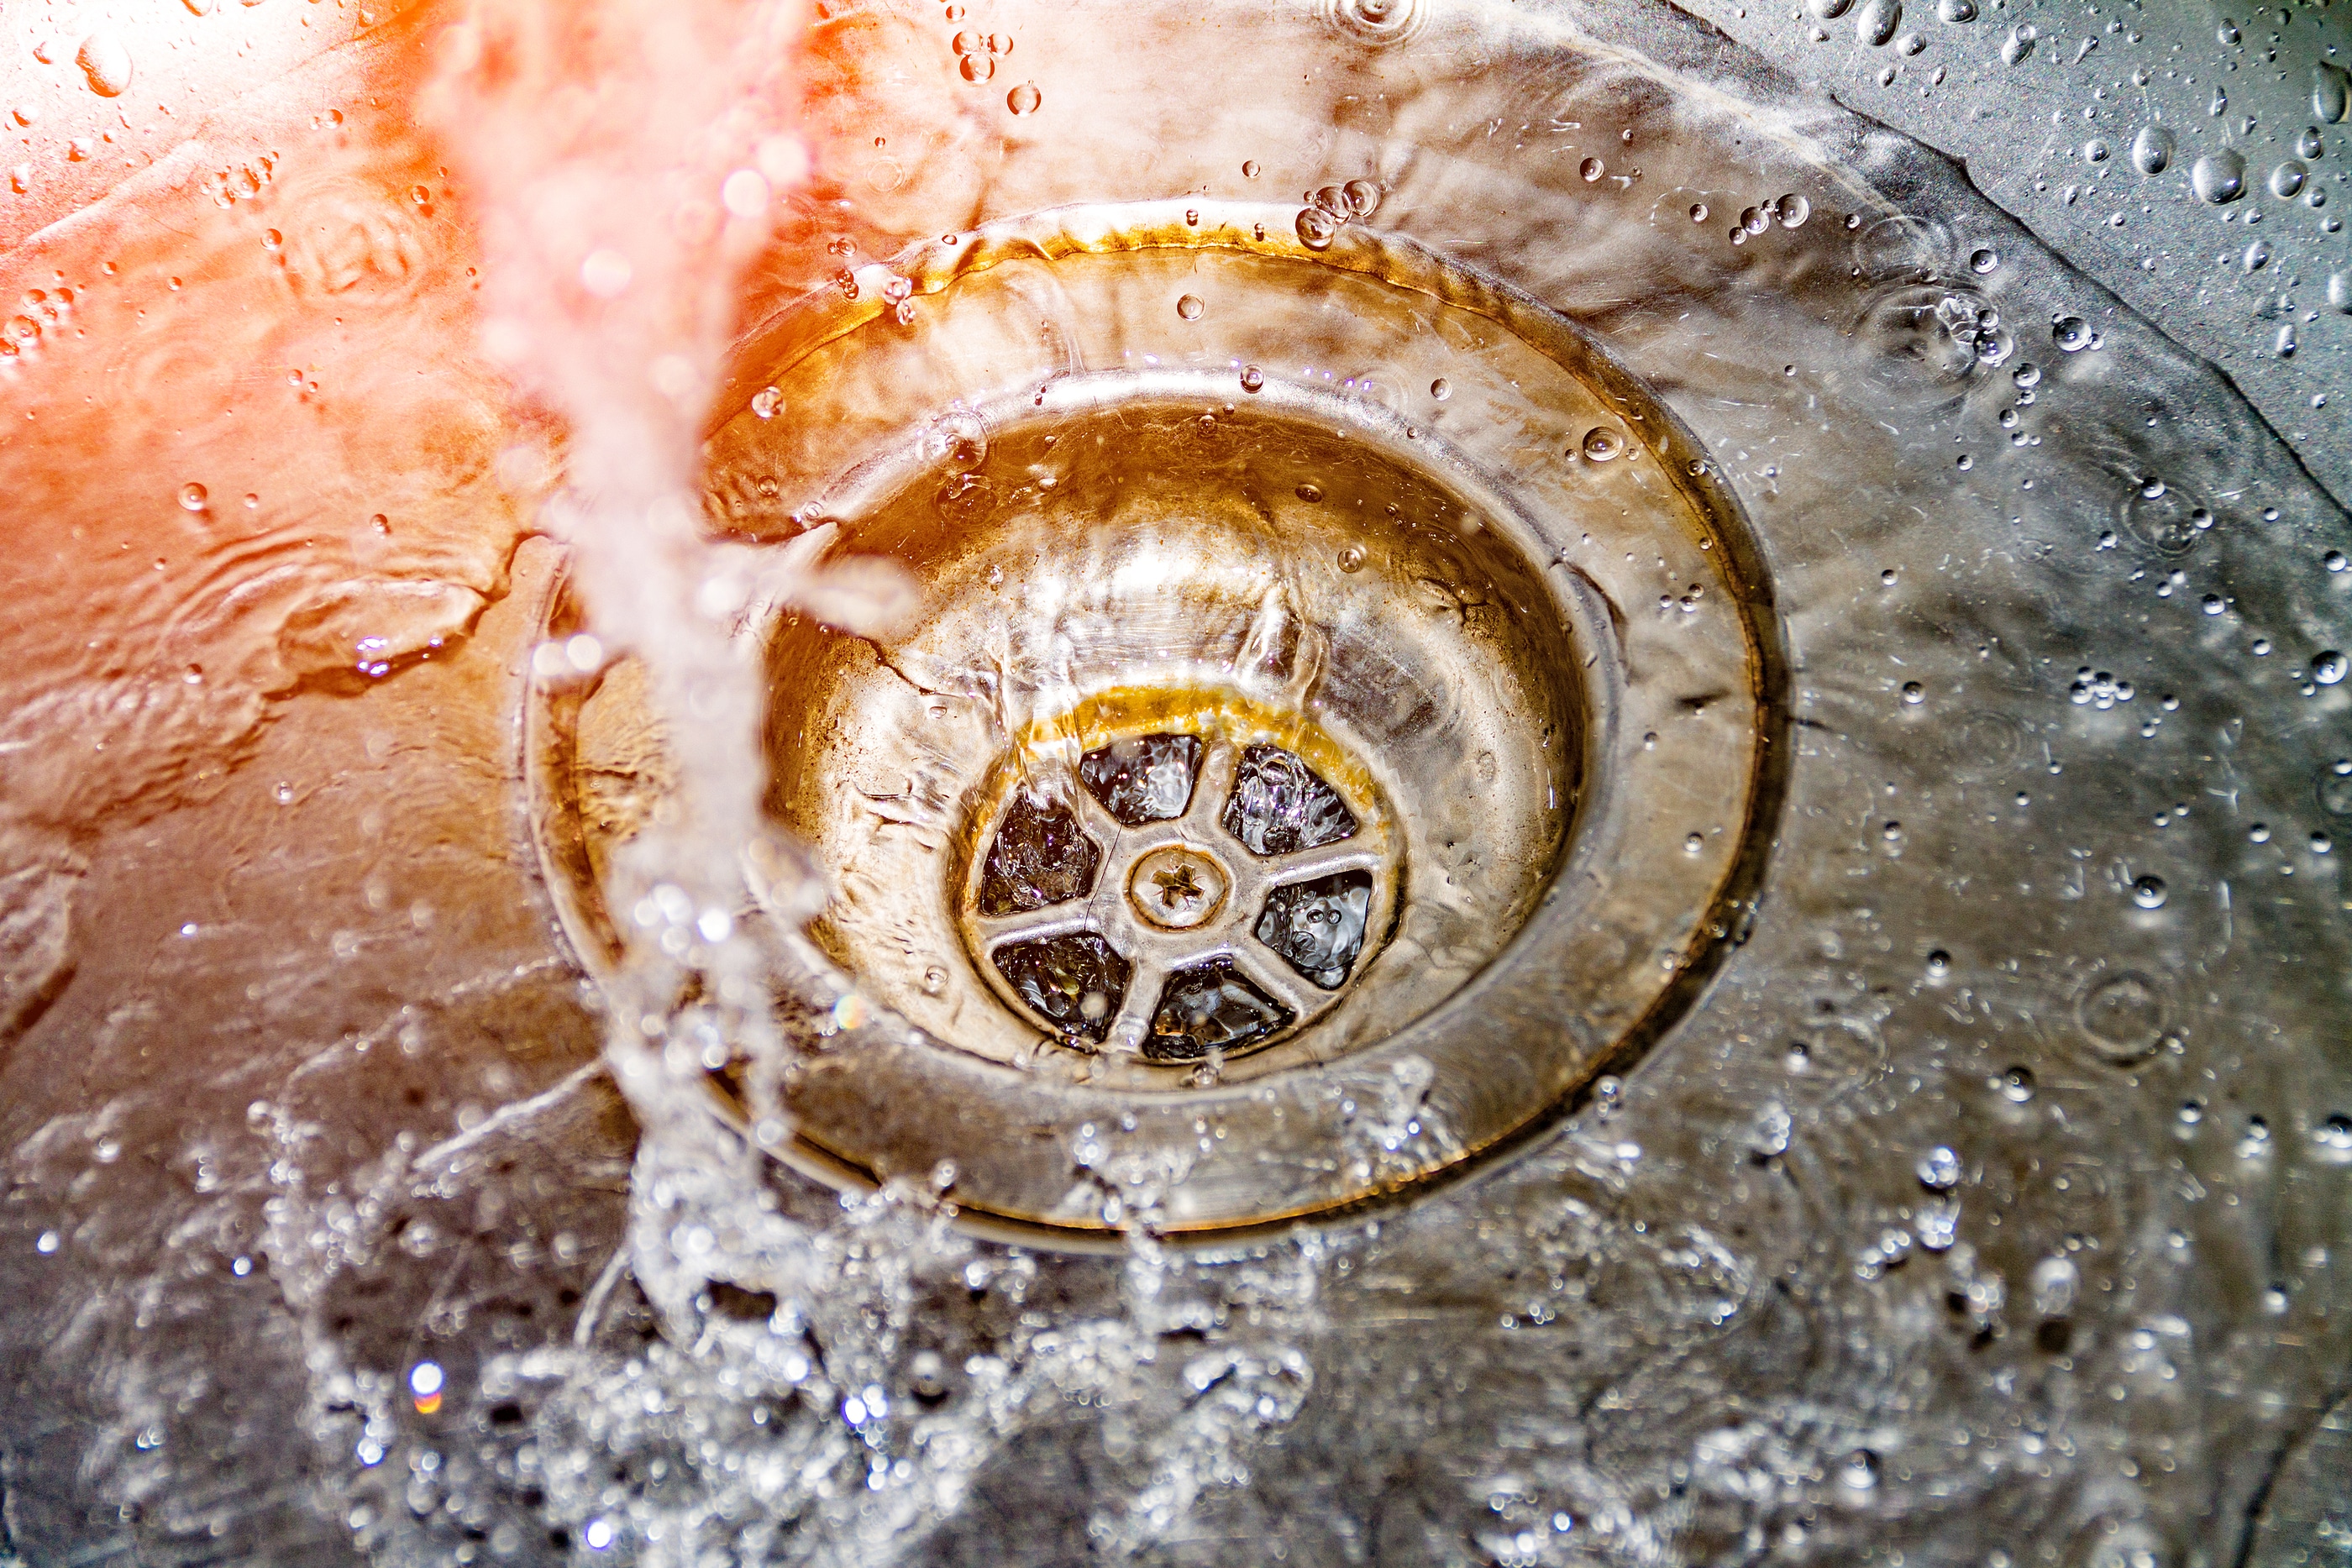 10 Proven Drain Cleaning Tips from the Plumbers Playbook